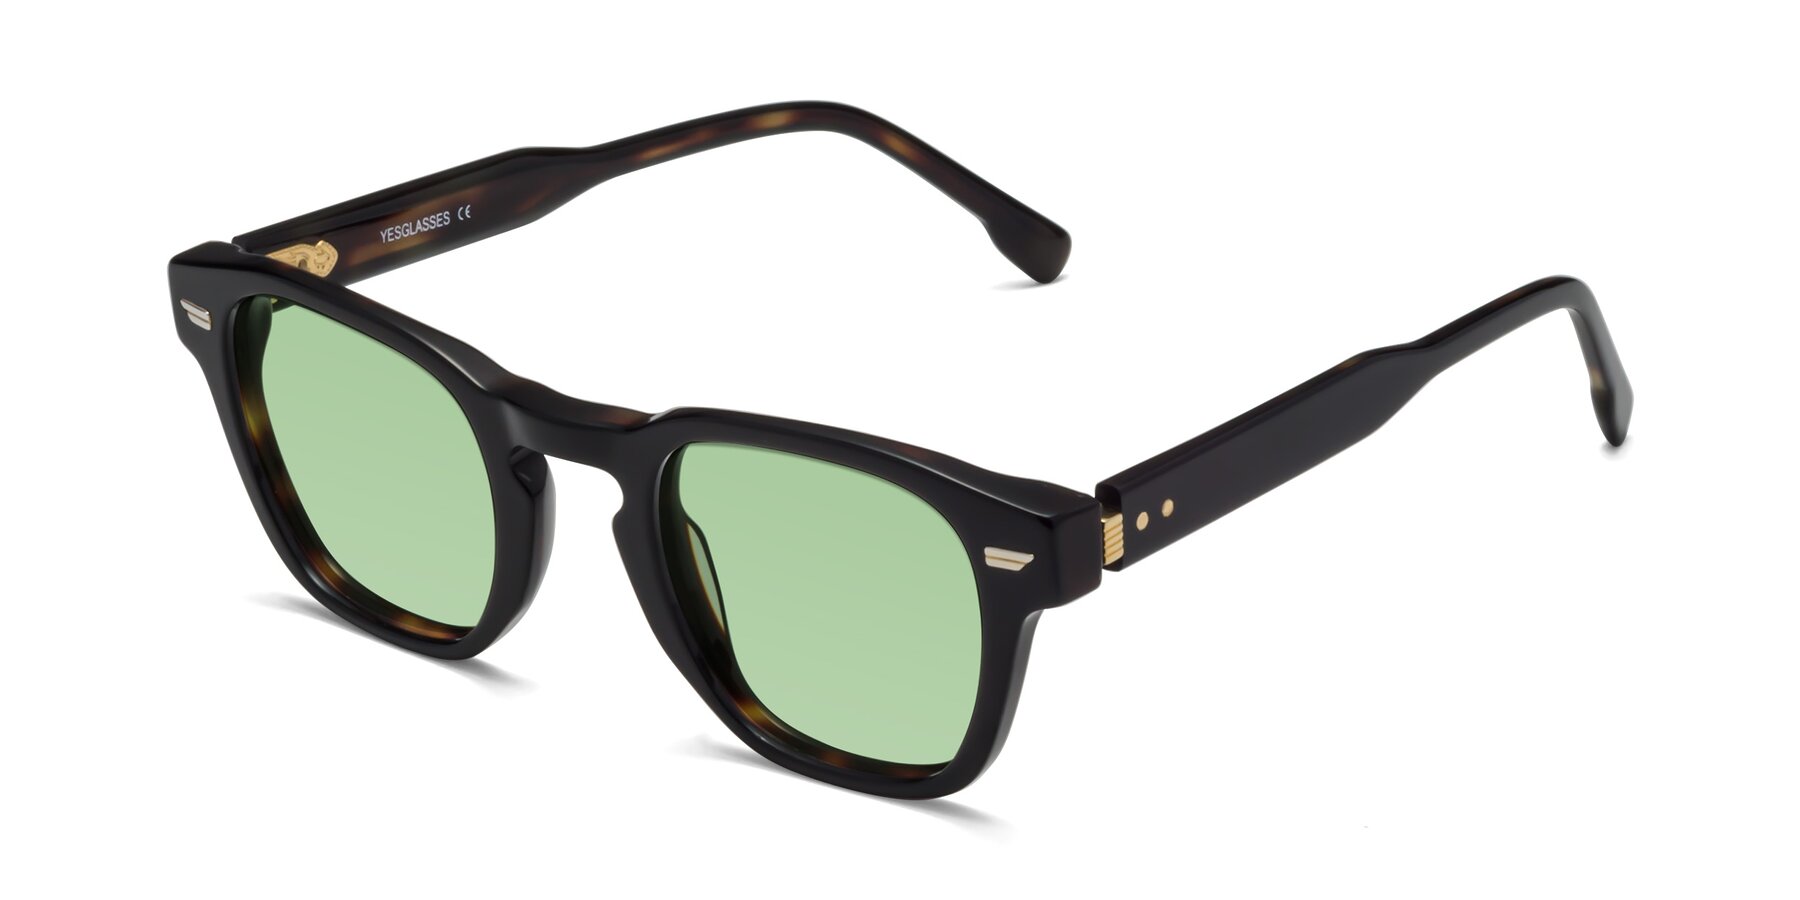 Angle of 1421 in Black-Tortoise with Medium Green Tinted Lenses